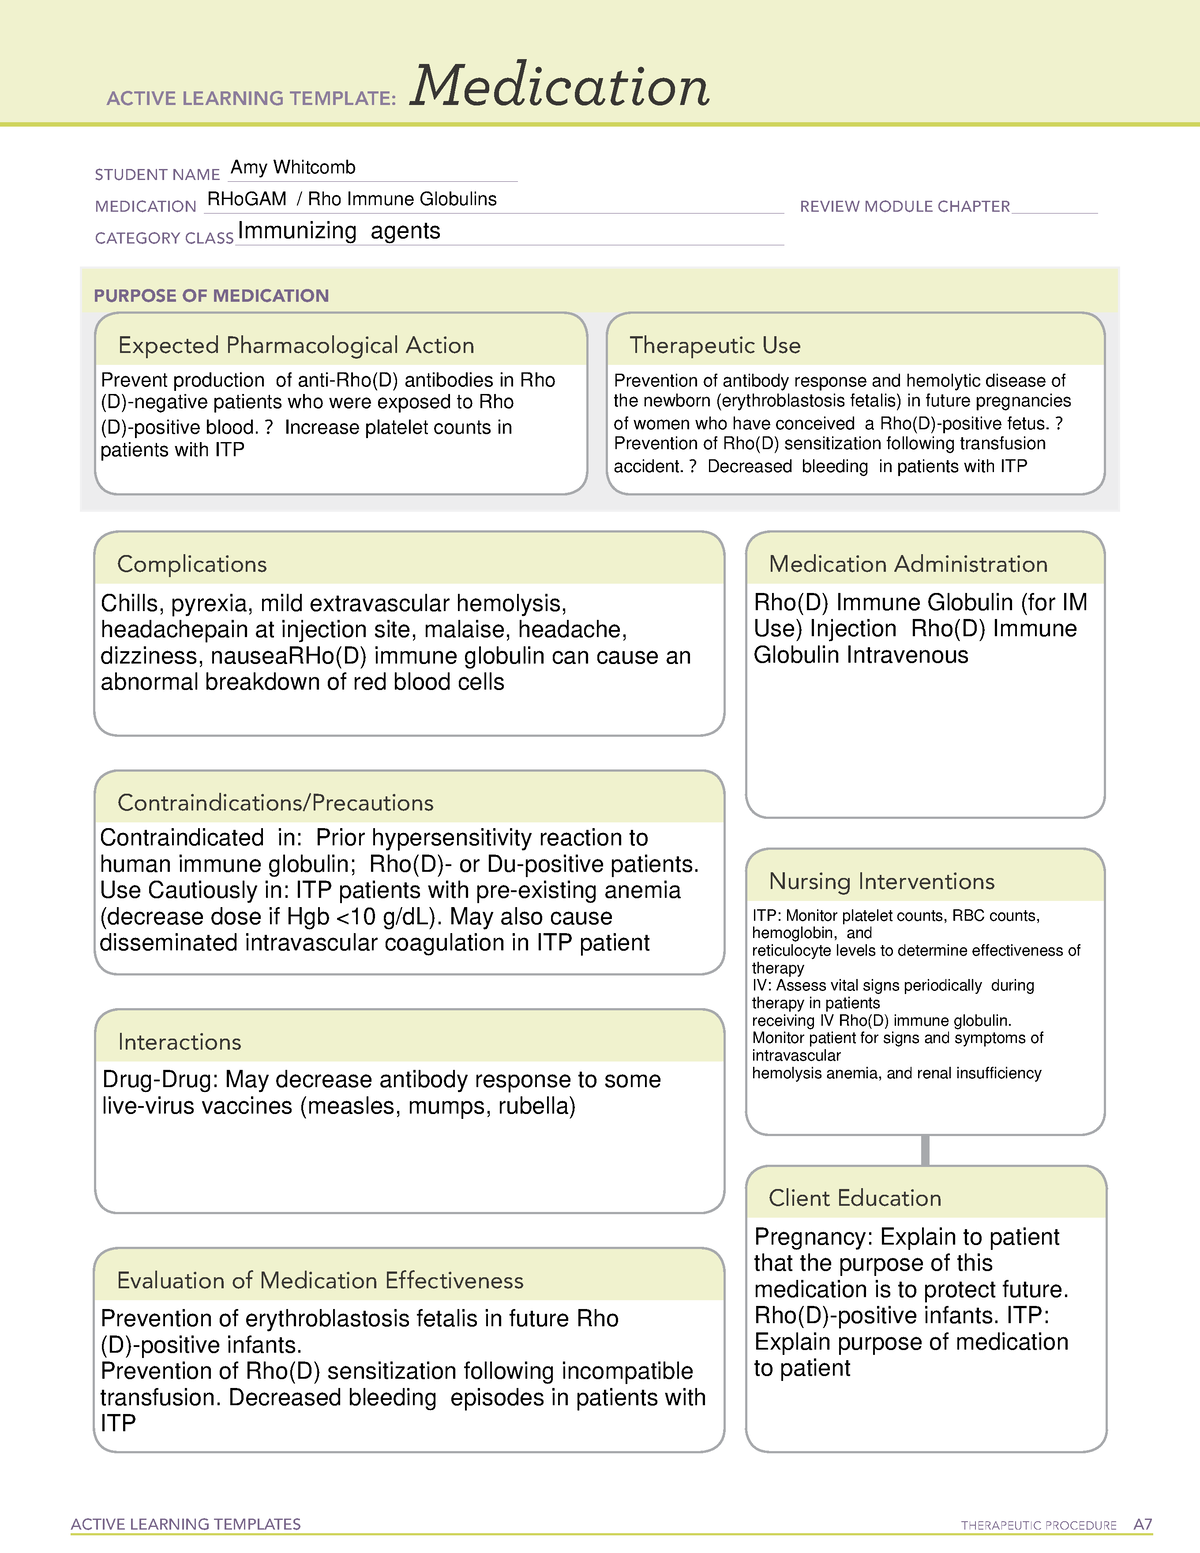 ati-rho-gam-medication-sheet-active-learning-templates-therapeutic